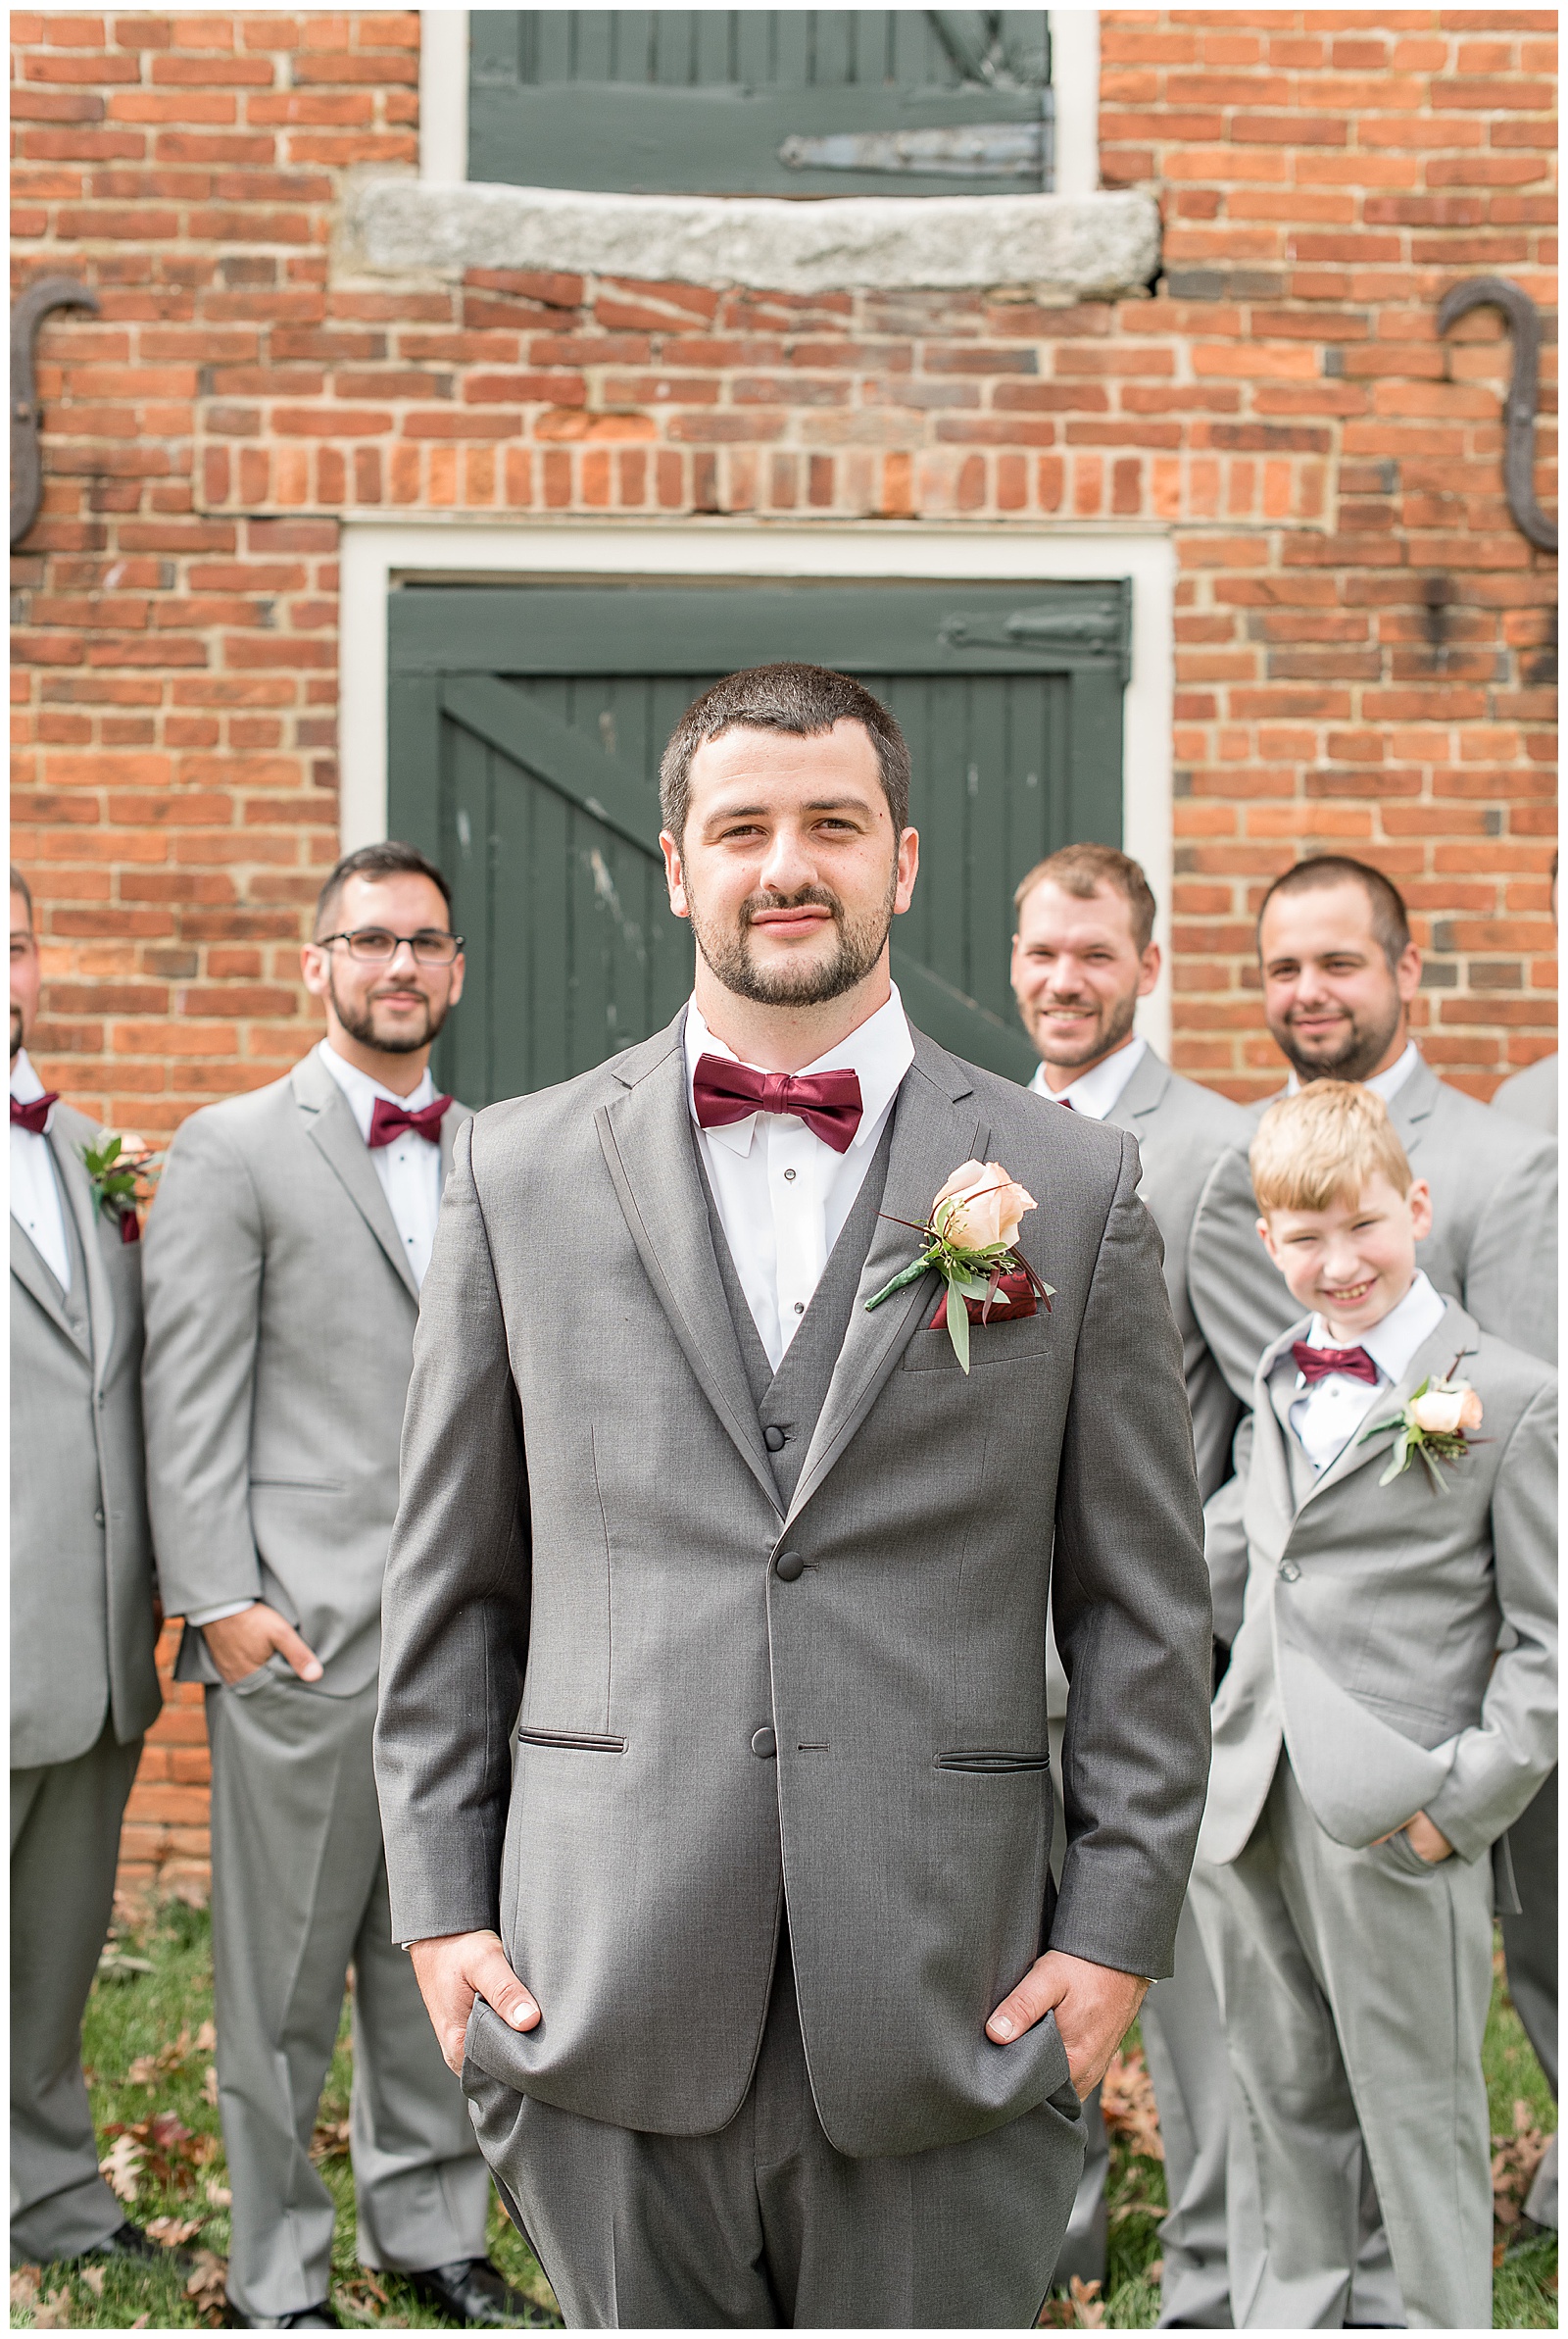 groom surrounded by groomsmen in gray suits by brick building at hayfields country club